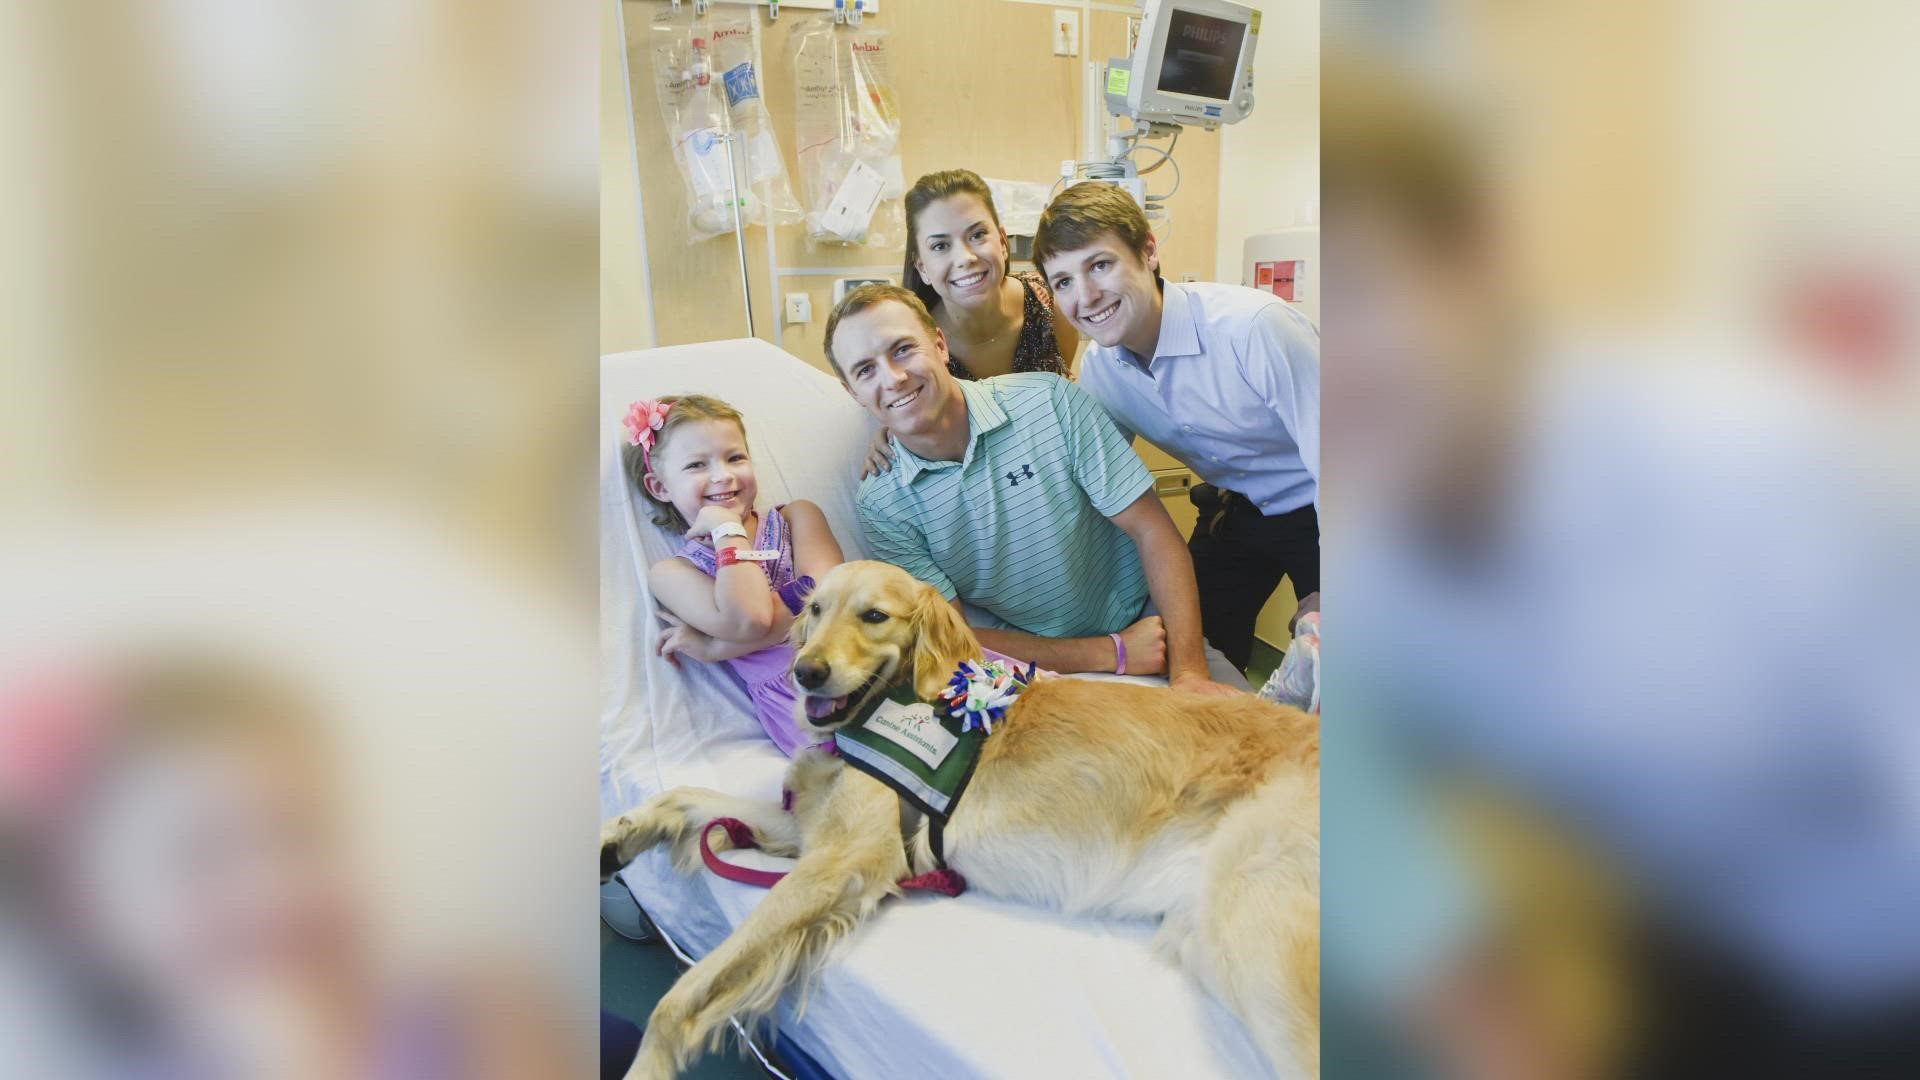 The Spieth family has been a longtime supporters of Children's Health in Plano -- which inspired their latest gift.